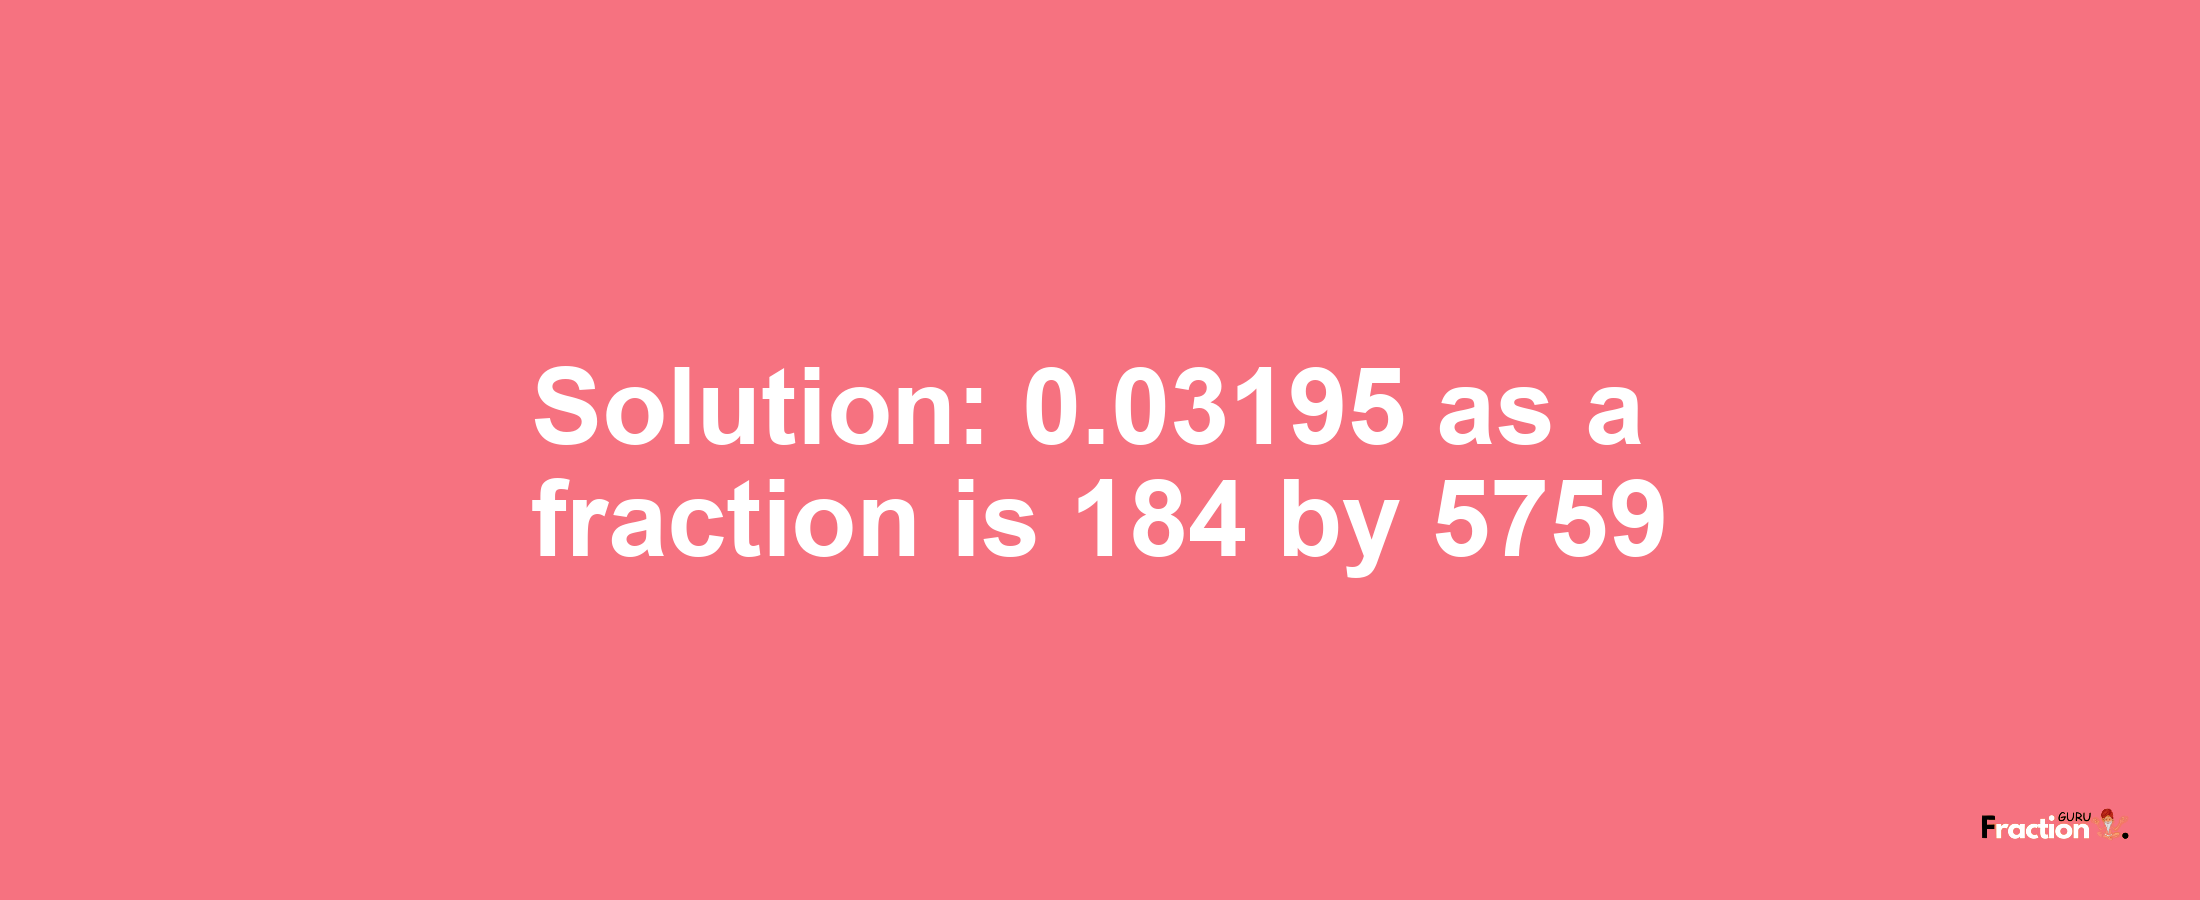 Solution:0.03195 as a fraction is 184/5759